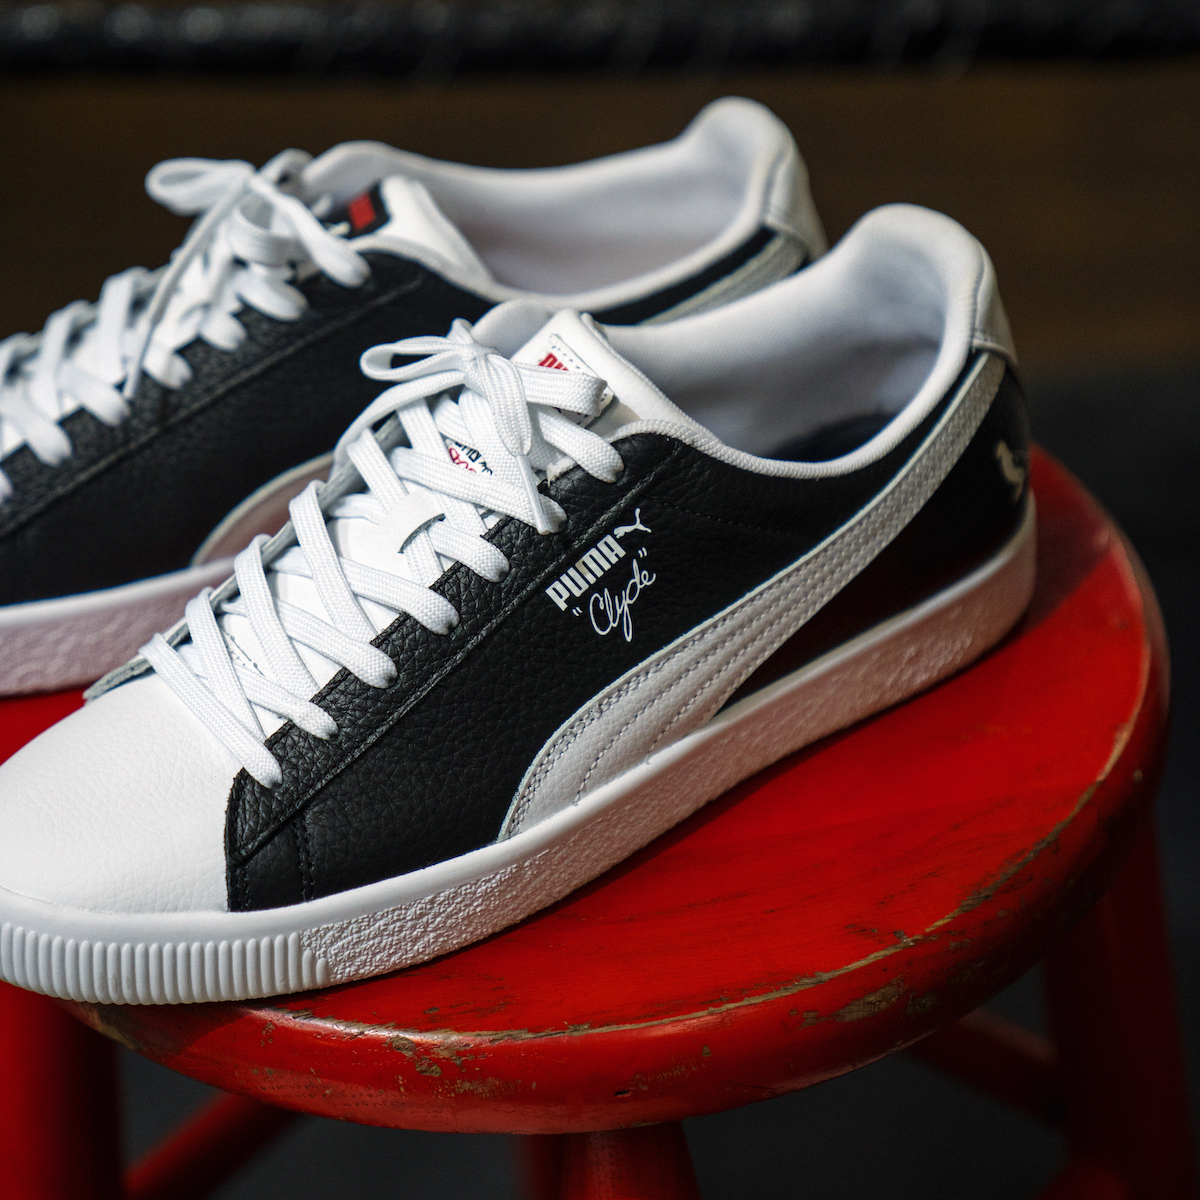 Jeff Staple PUMA Clyde Create from Chaos 2 Release Date